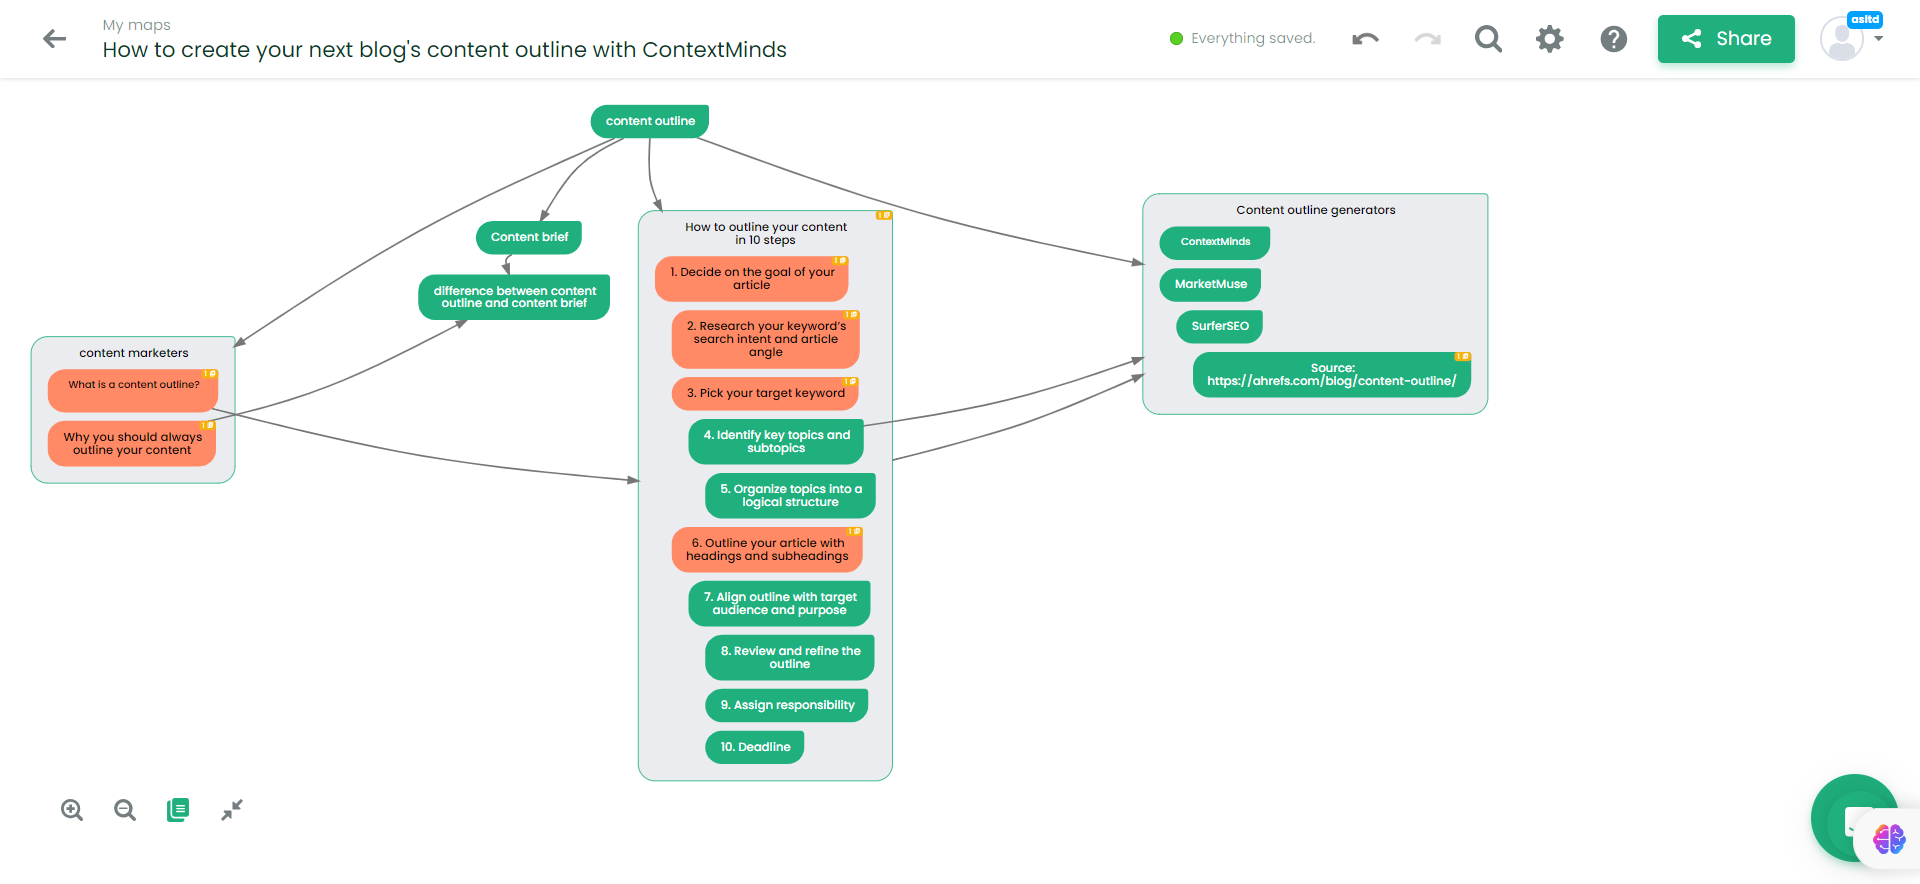 Mind mapping in ContextMinds